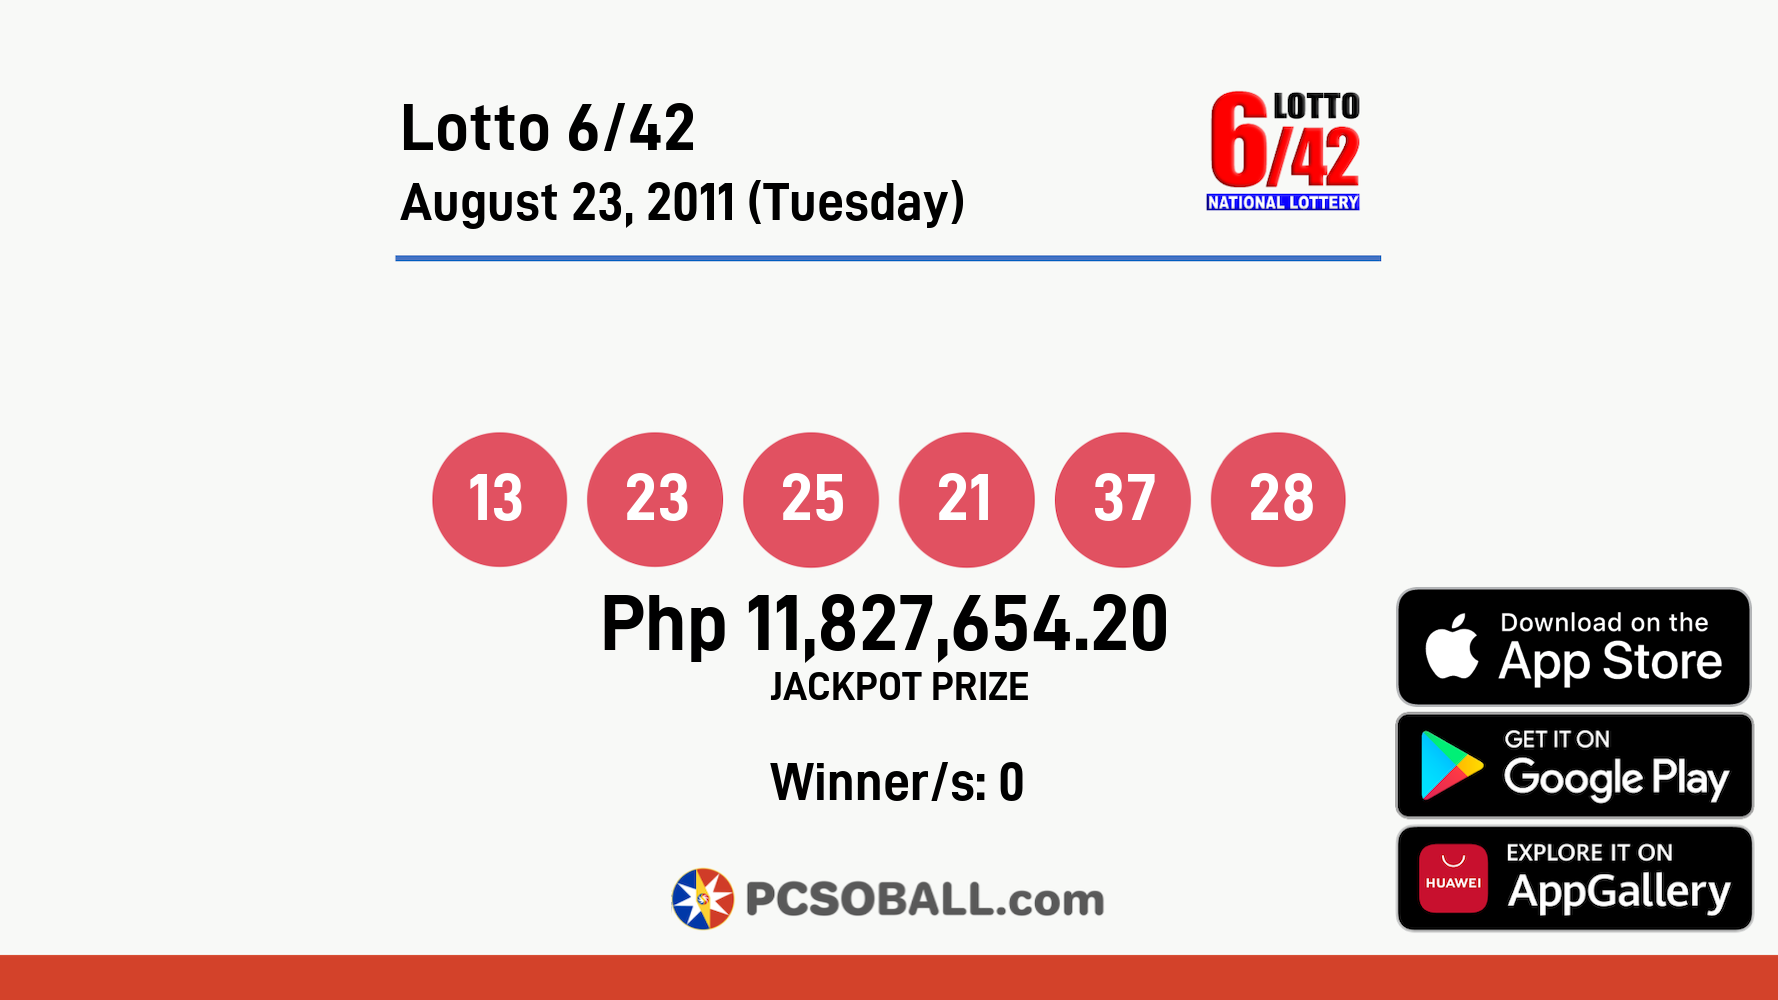 Lotto 6/42 August 23, 2011 (Tuesday) Result